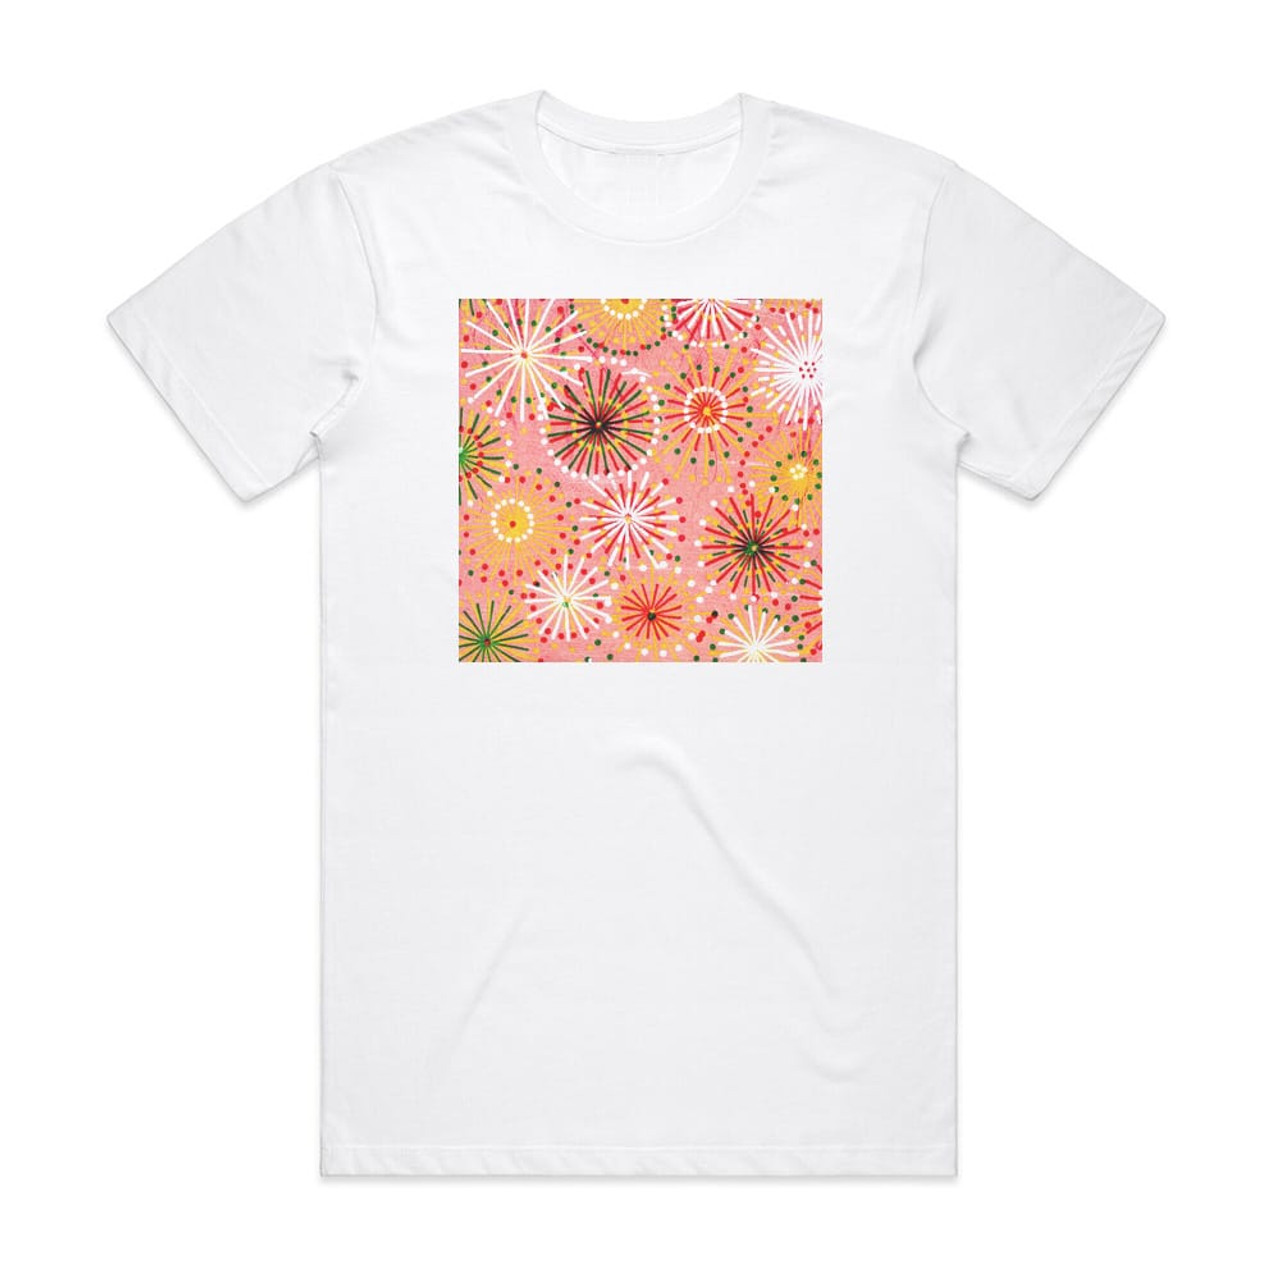 Bright Eyes Letting Off The Happiness Album Cover T-Shirt White